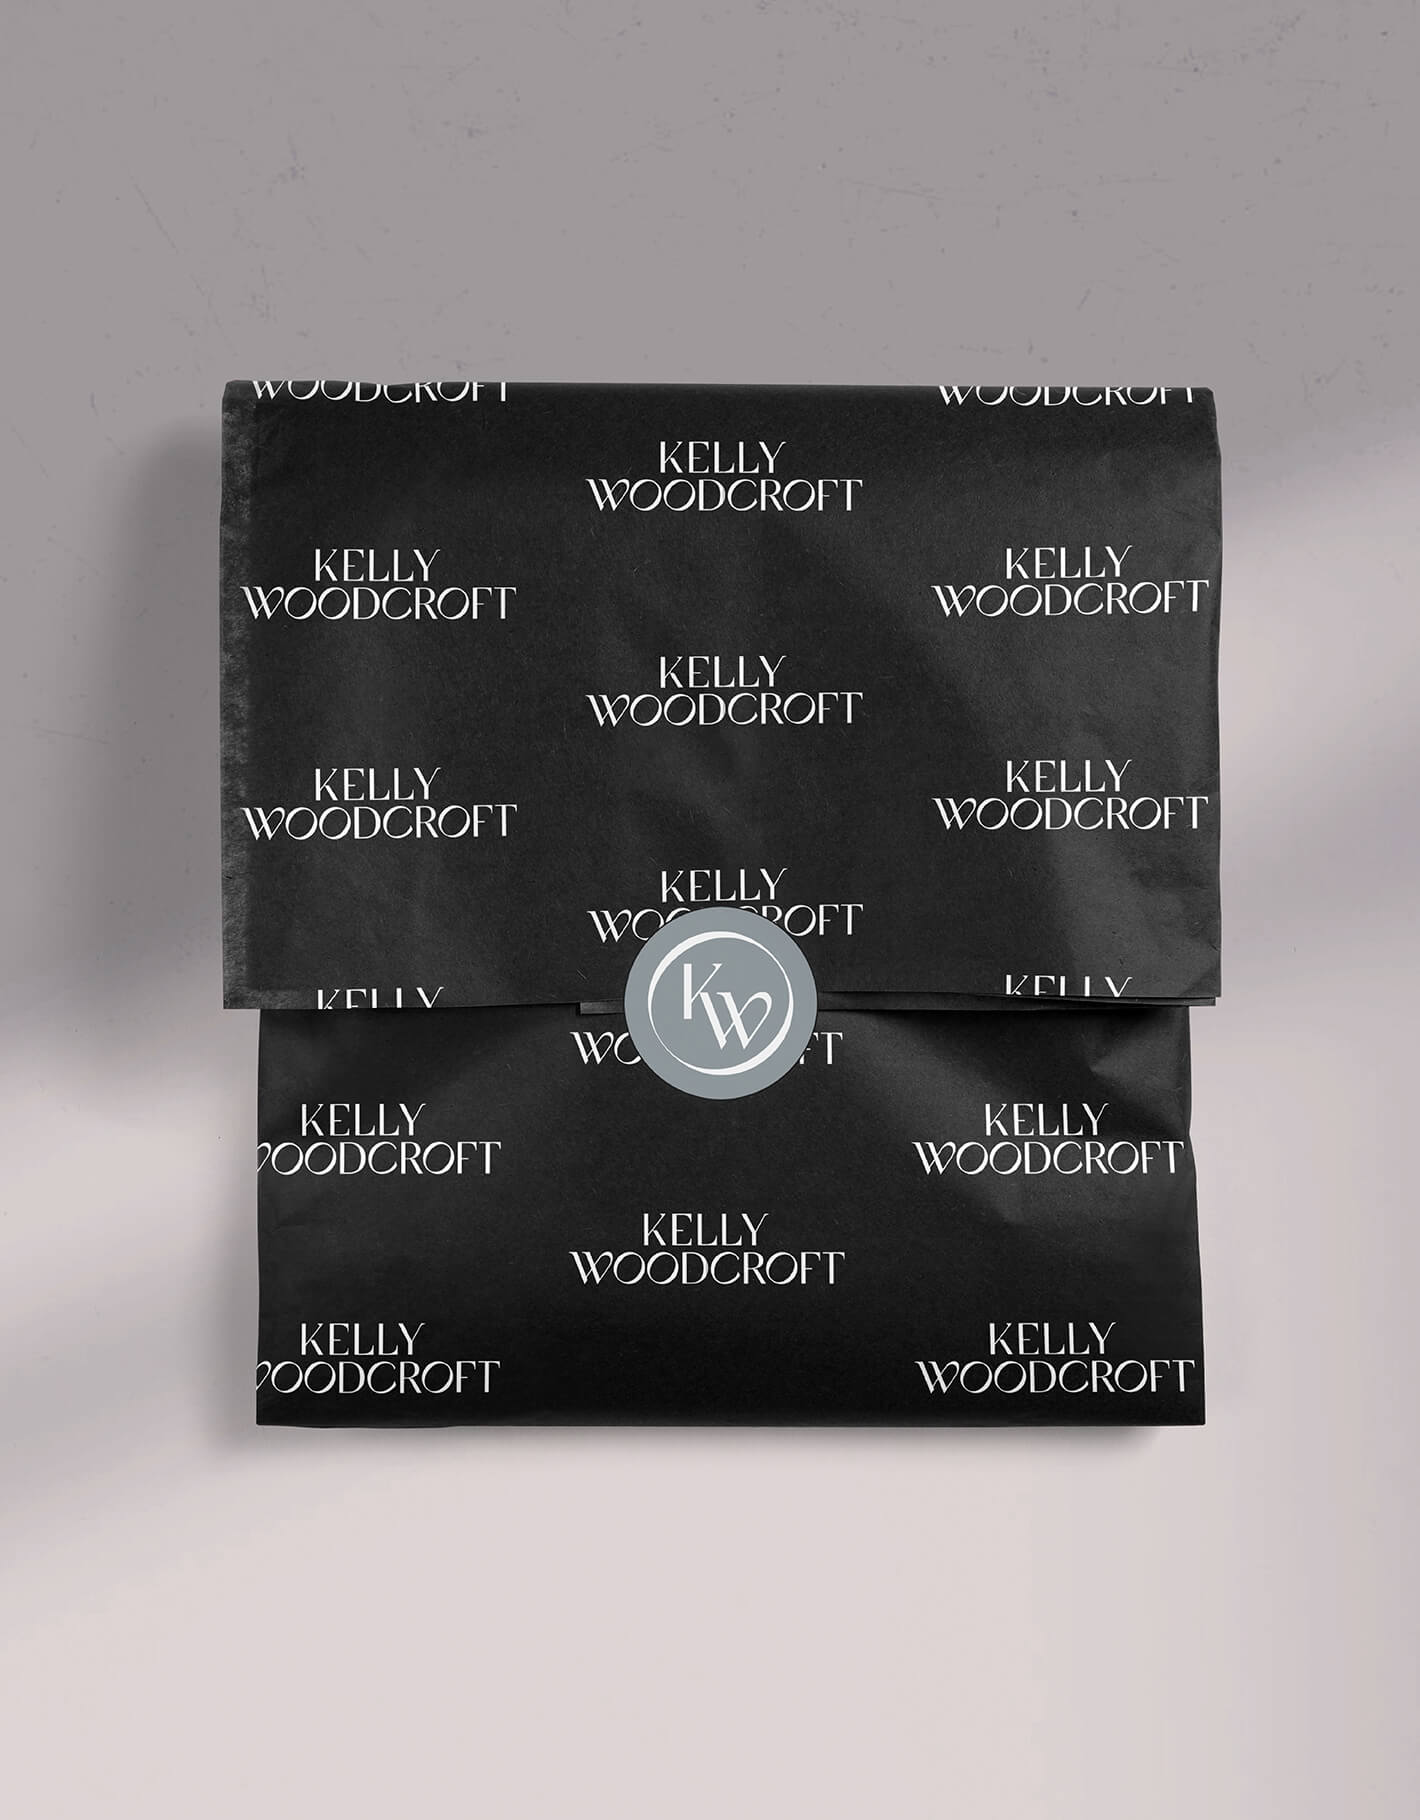 Custom tissue paper design with the kelly woodcroft logo and a custom sticker seal sits in a grey background